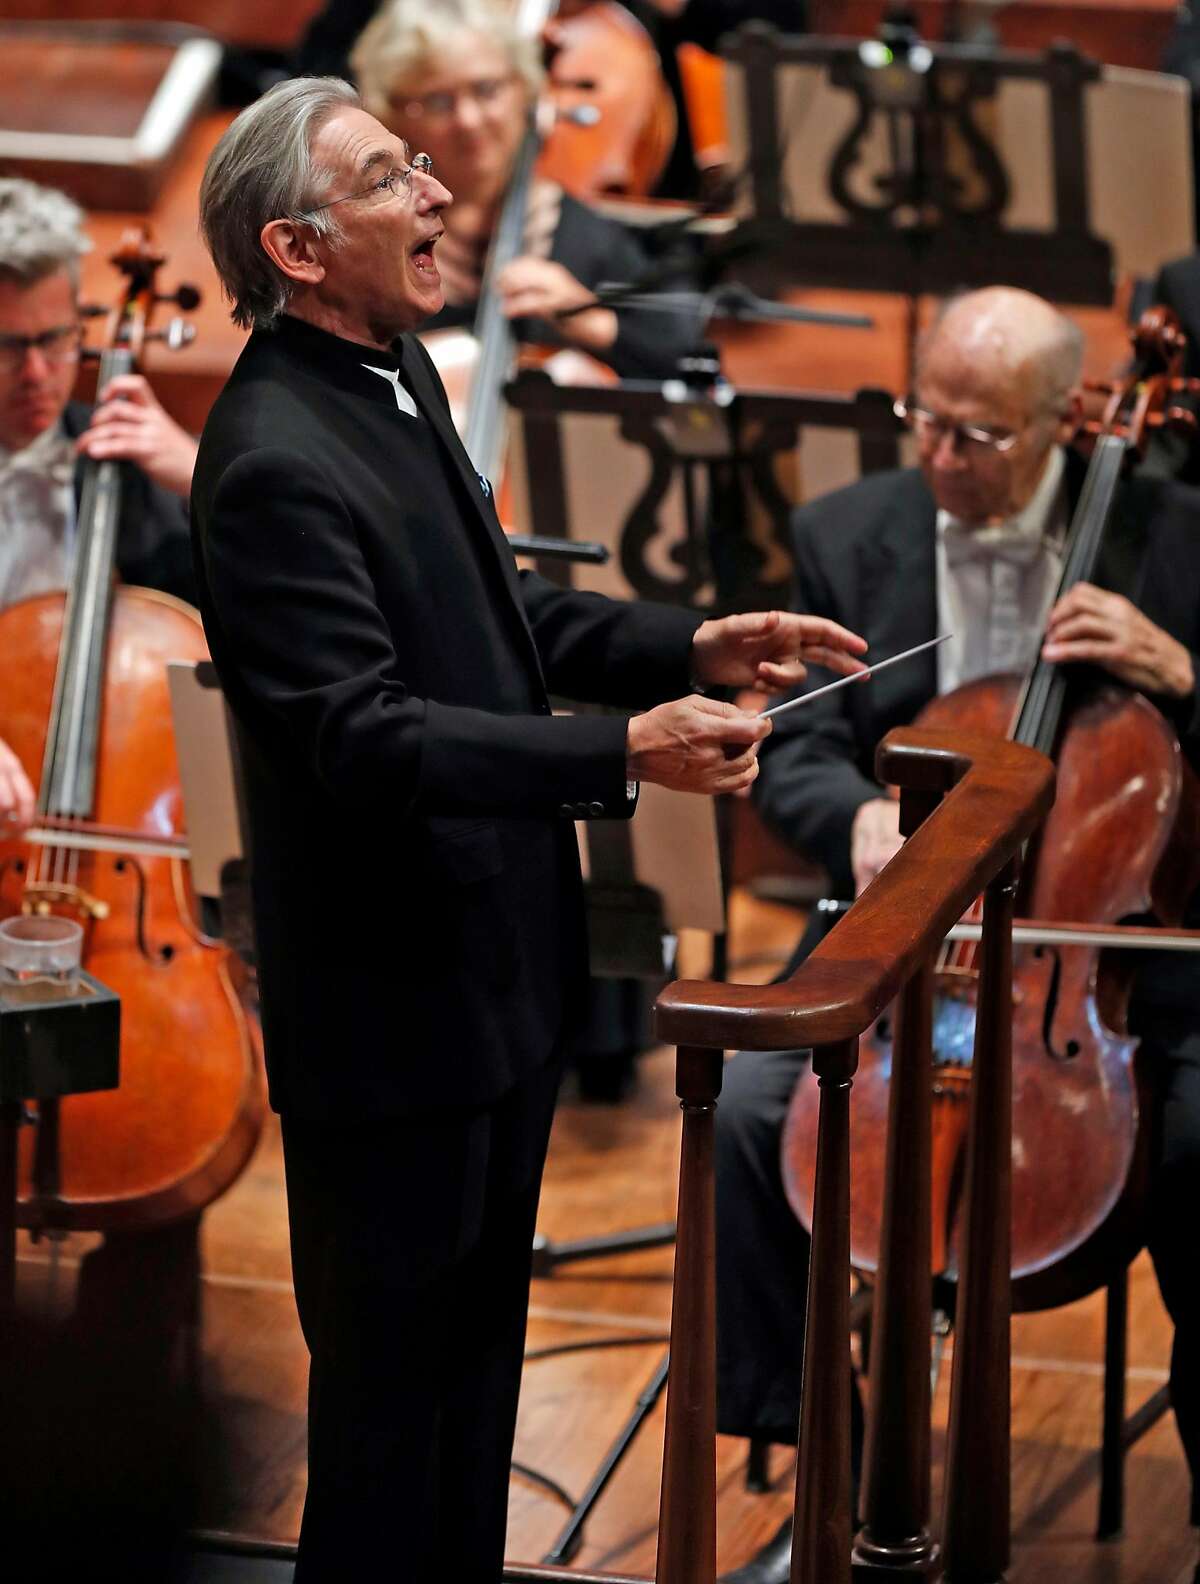 Music Director and Conductor Michael Tilson Thomas during San Francisco Symphony Opening Night Gala concert at Davies Symphony Hall in San Francisco, Calif., on Thursday, September 14, 2017.